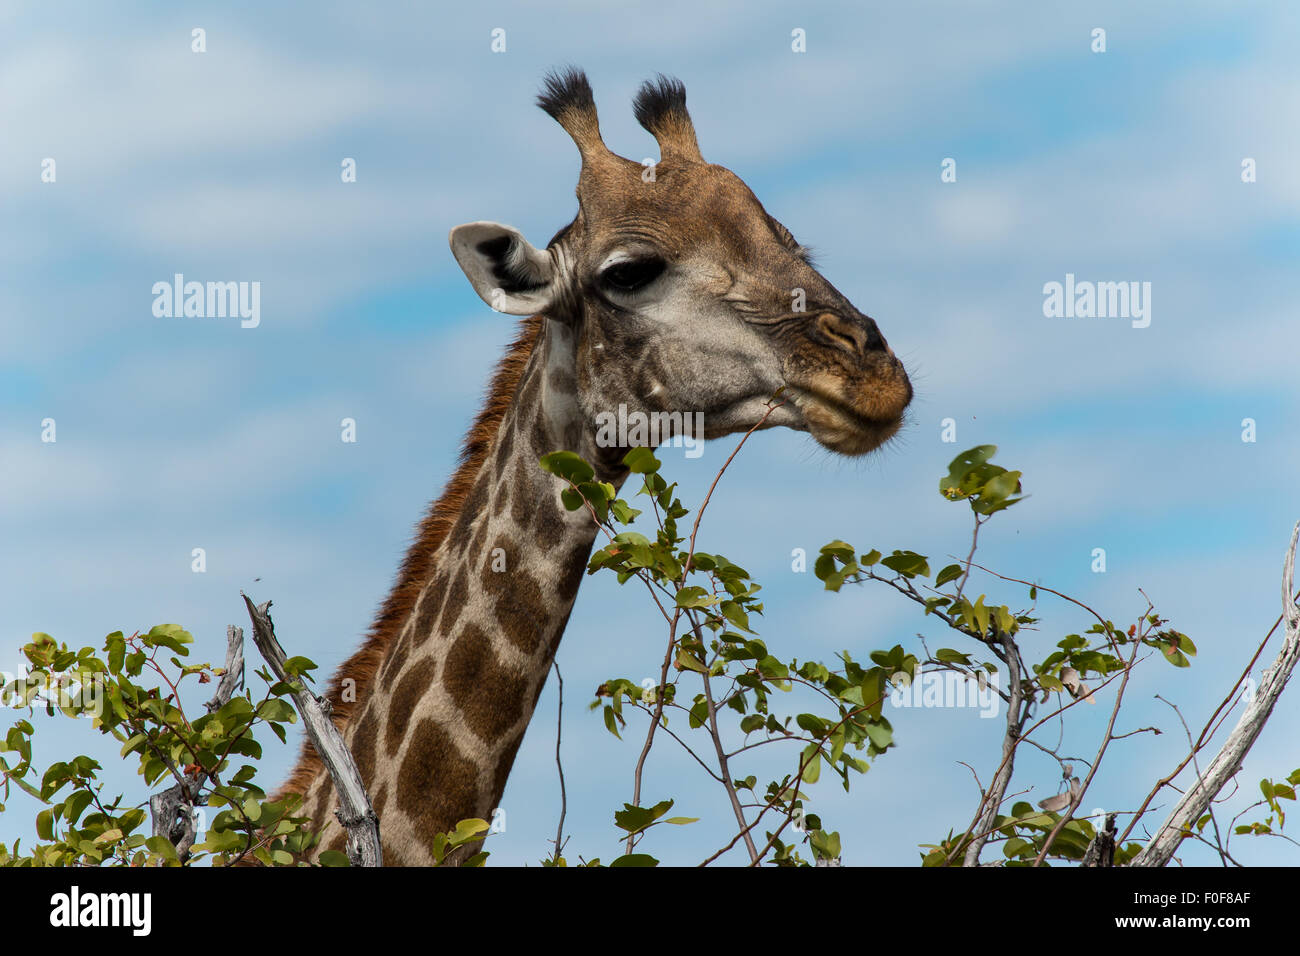 Giraffe eating leafs of a tree in Nxai Pan. A long neck is ideal for high trees. Stock Photo